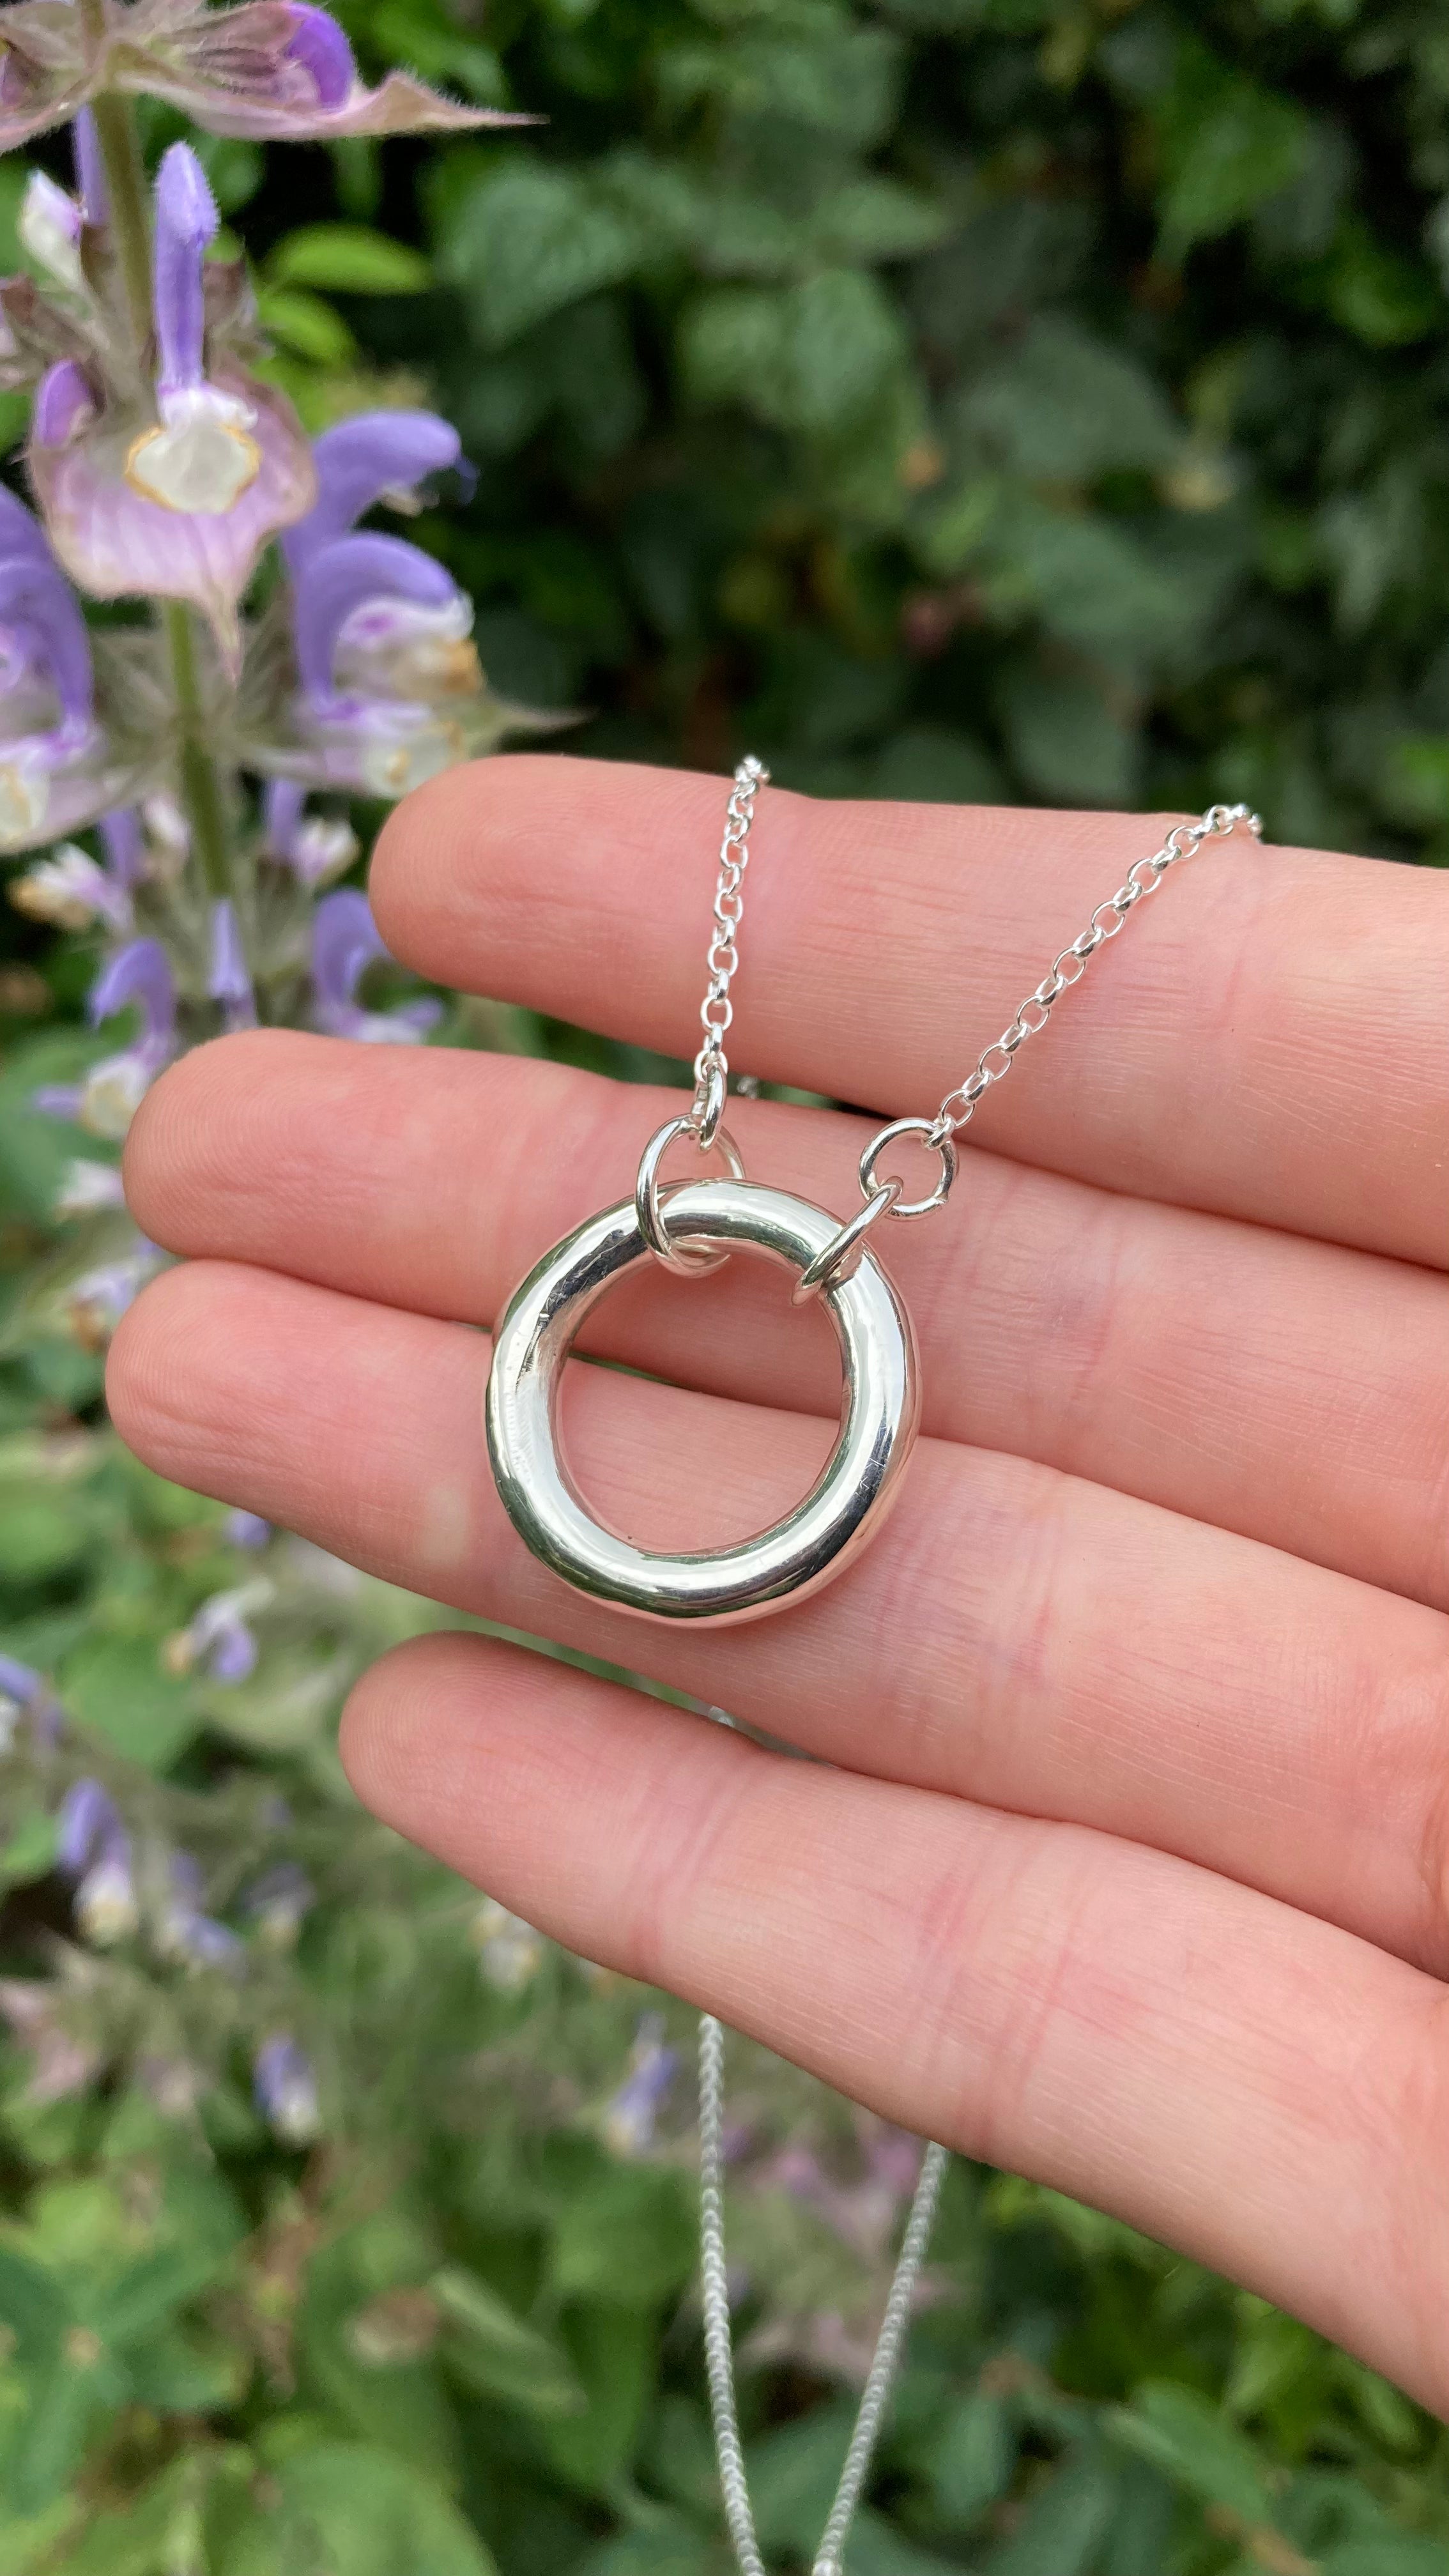 SACRED CIRCLE Handmade Sterling Silver Necklace